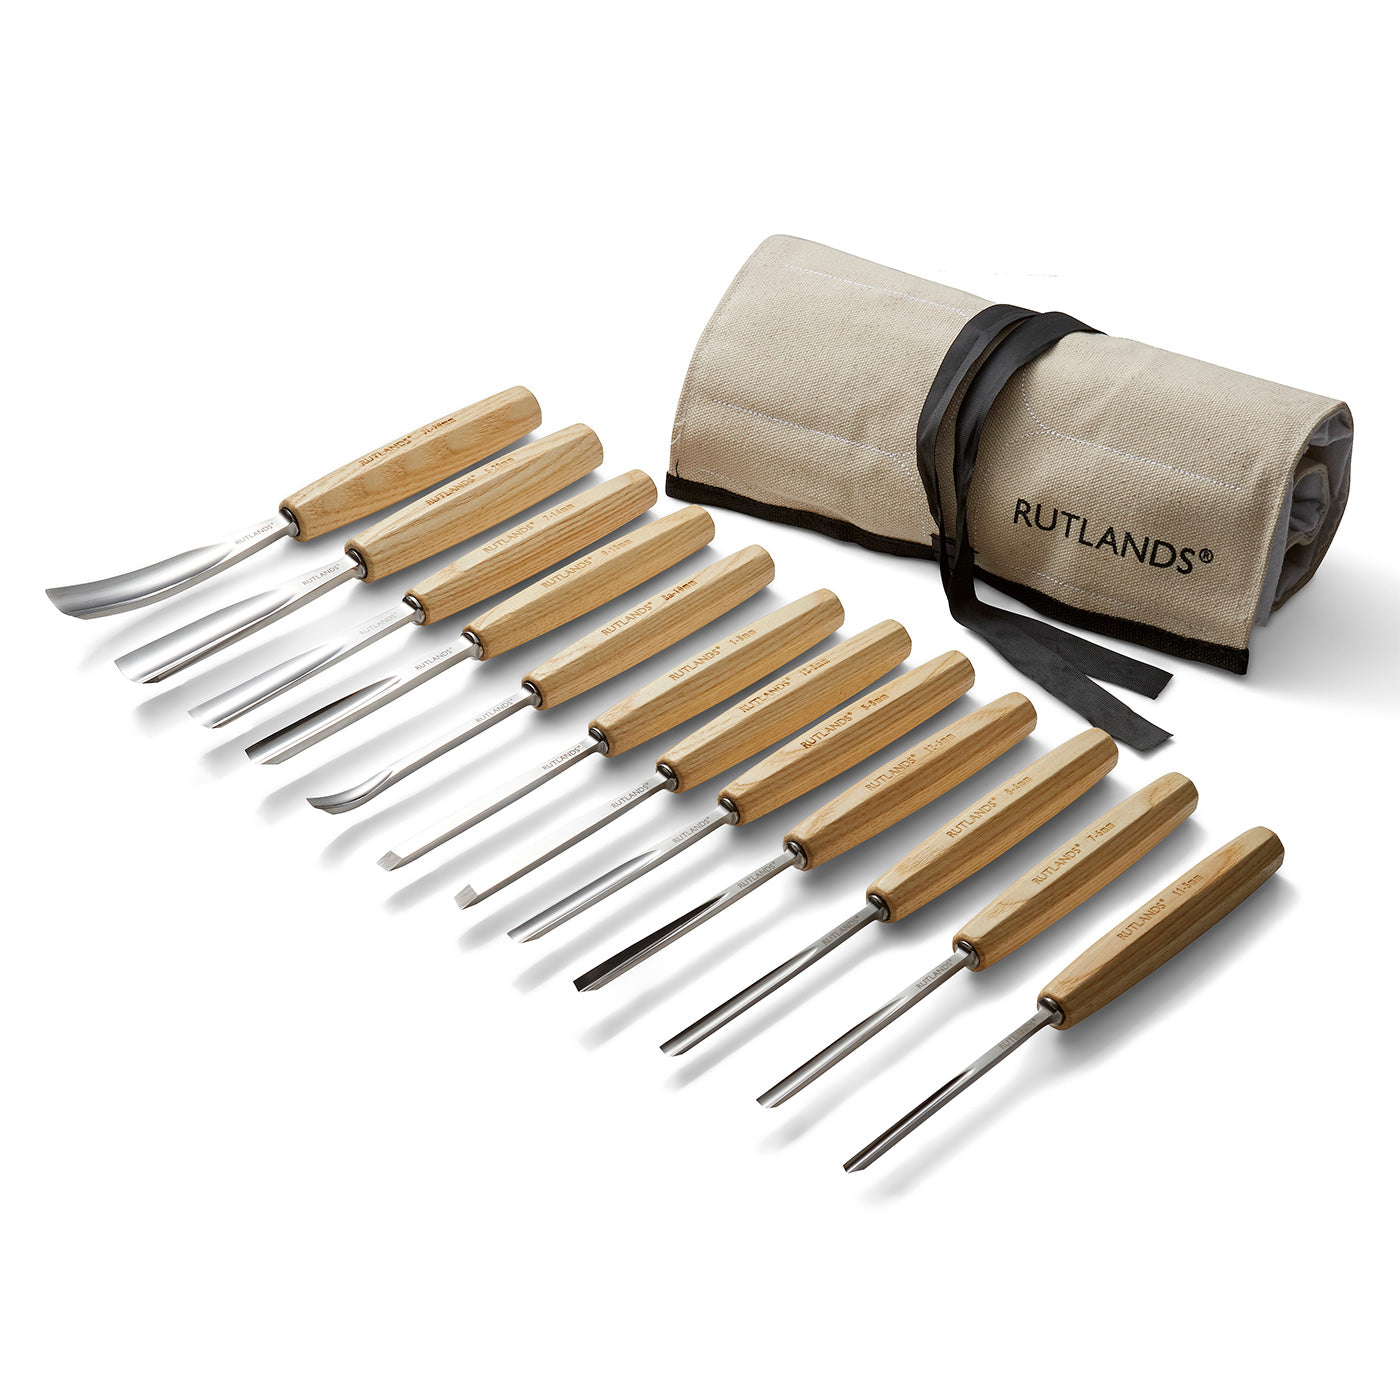 Carving Tools - Set of 12